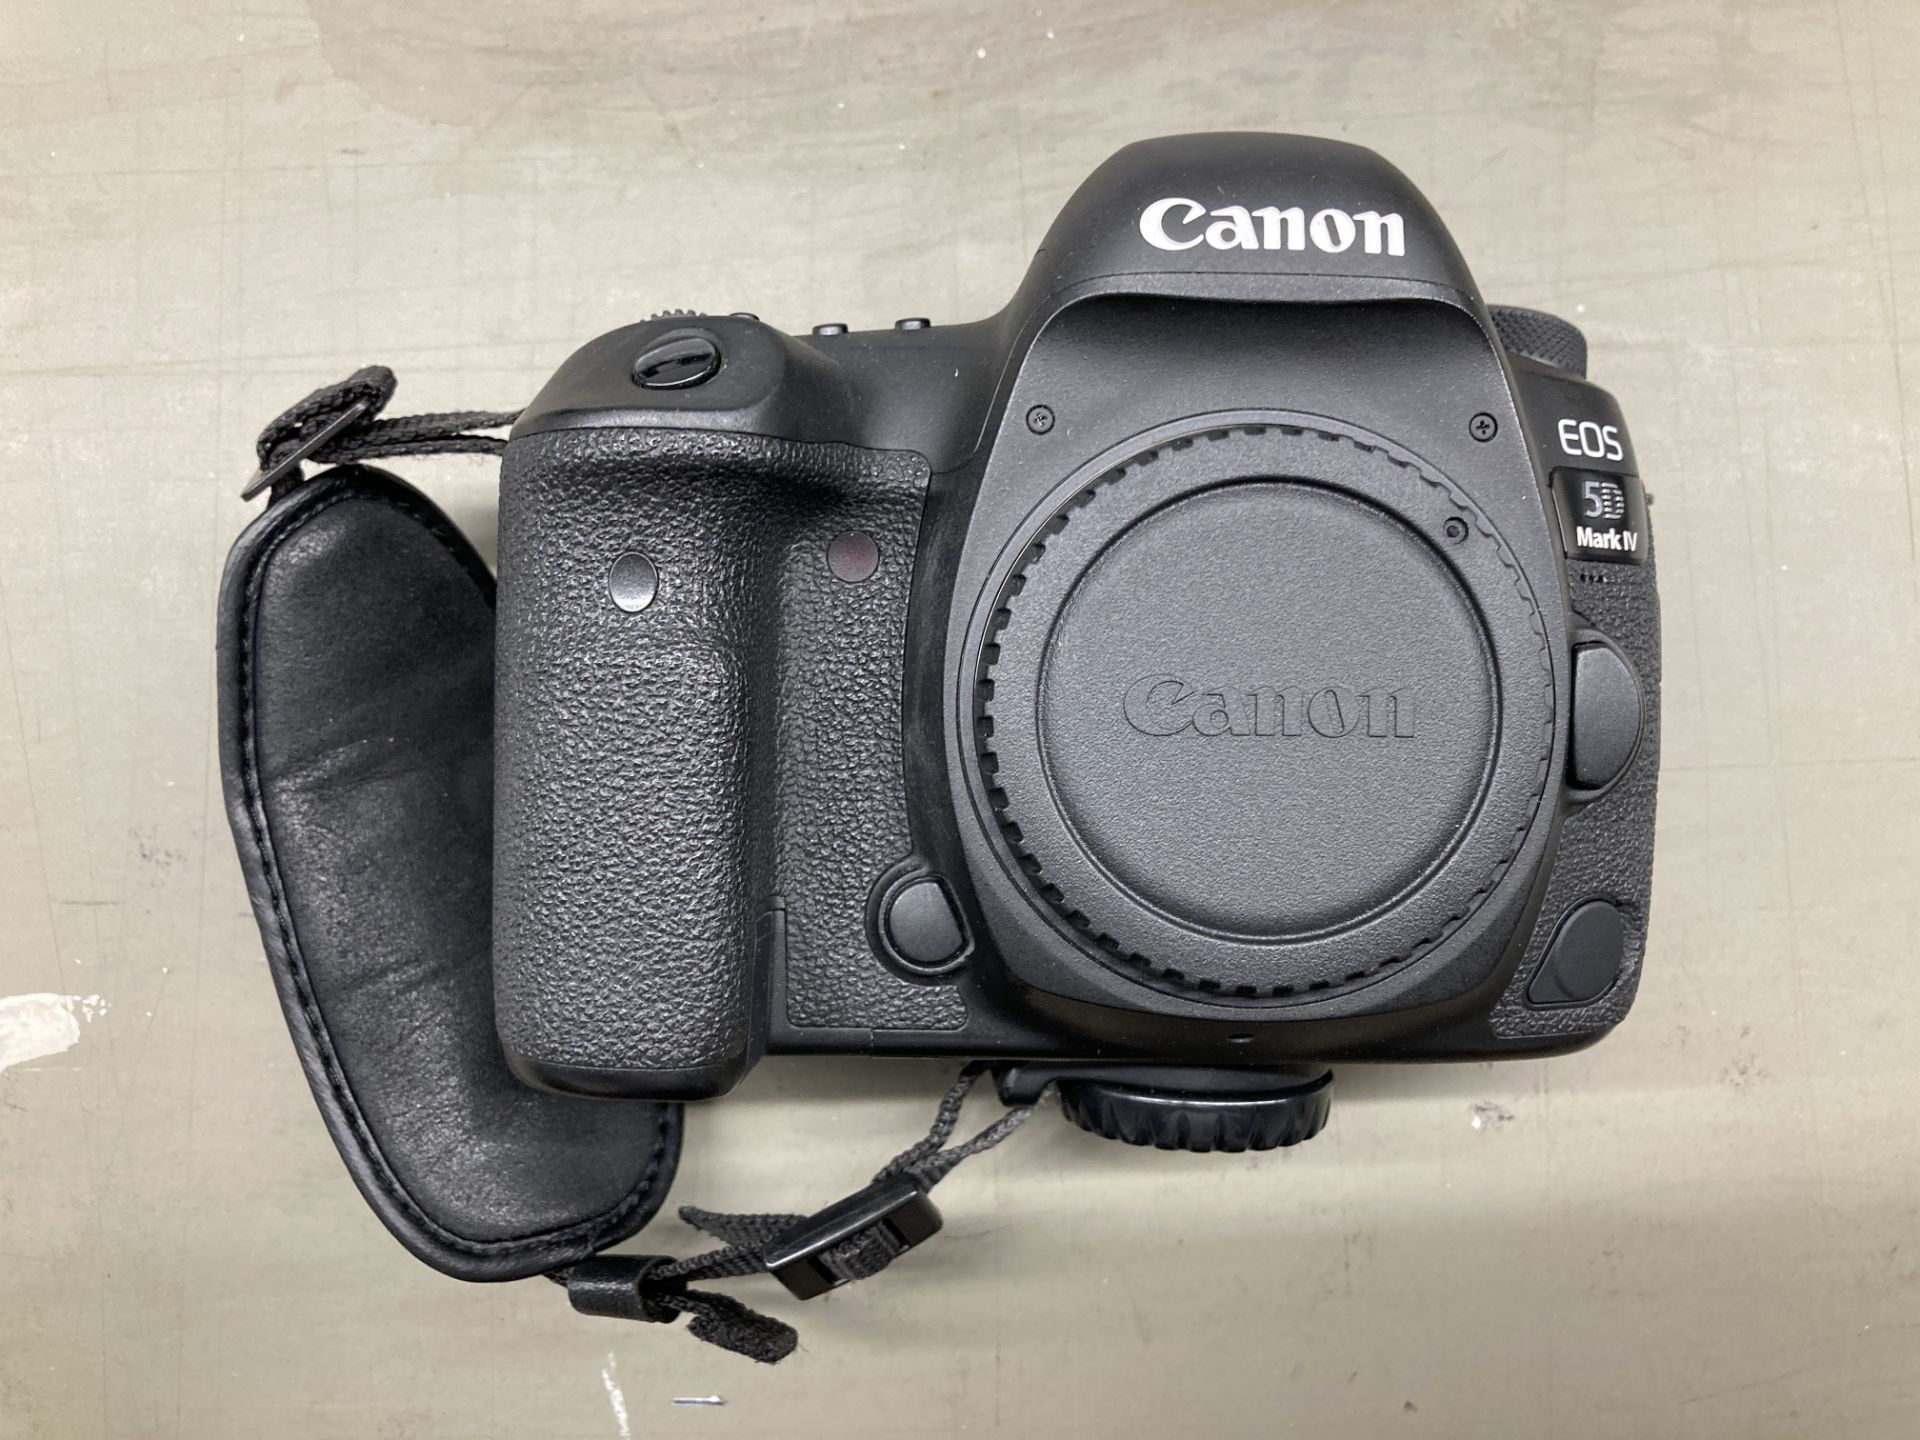 Canon EOS 5D Mark IV (WG) DSLR camera body with charger, spare batteries and leads